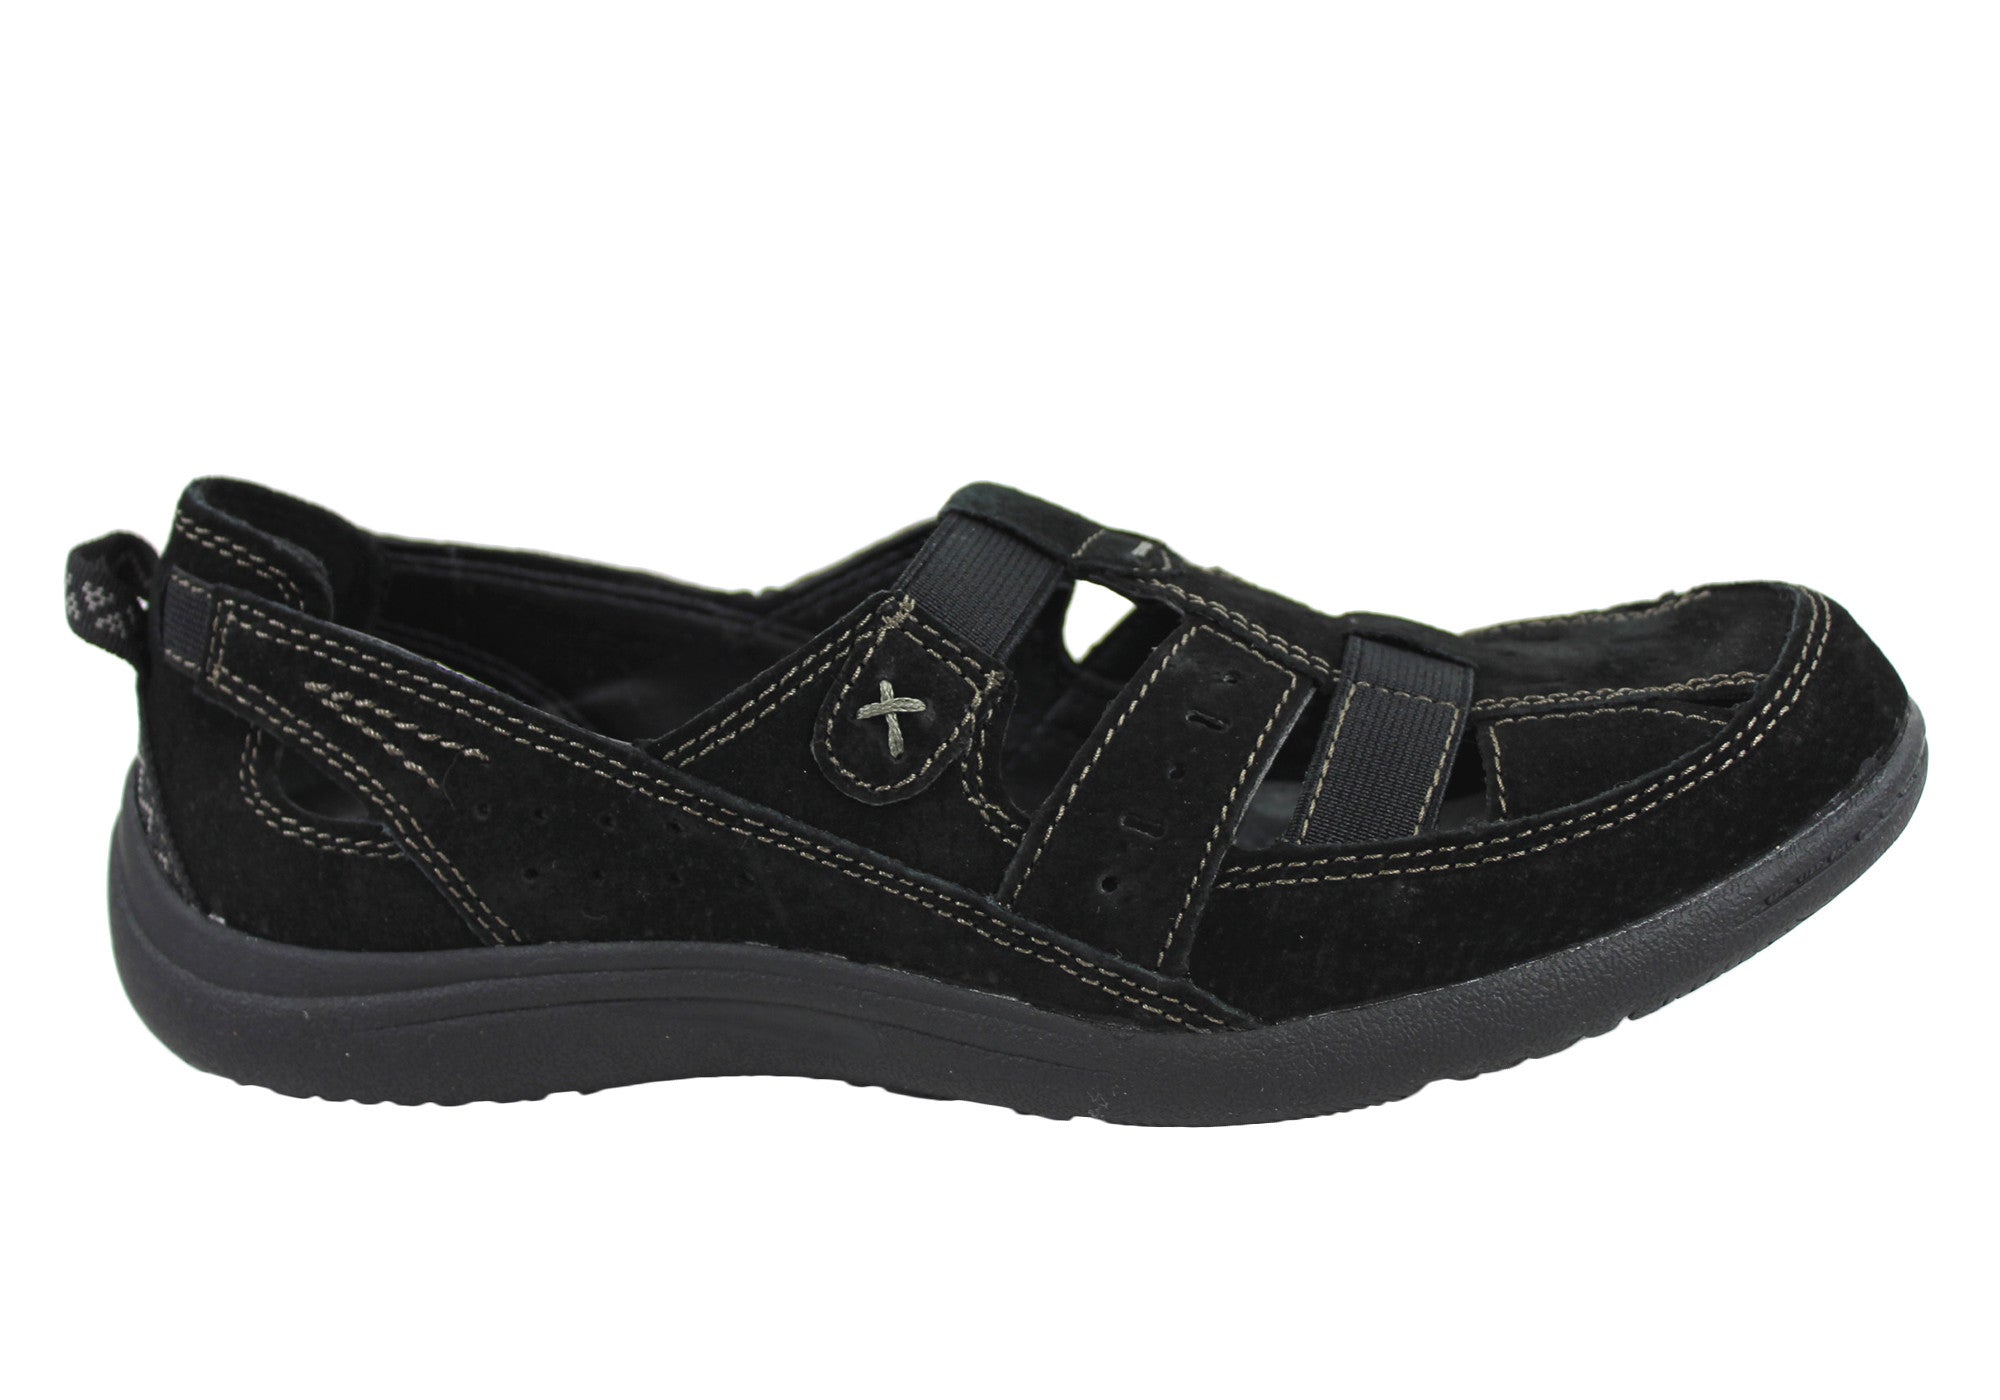 Planet Shoes Barmy Womens Comfort Shoes Cushioned With Arch Support | eBay